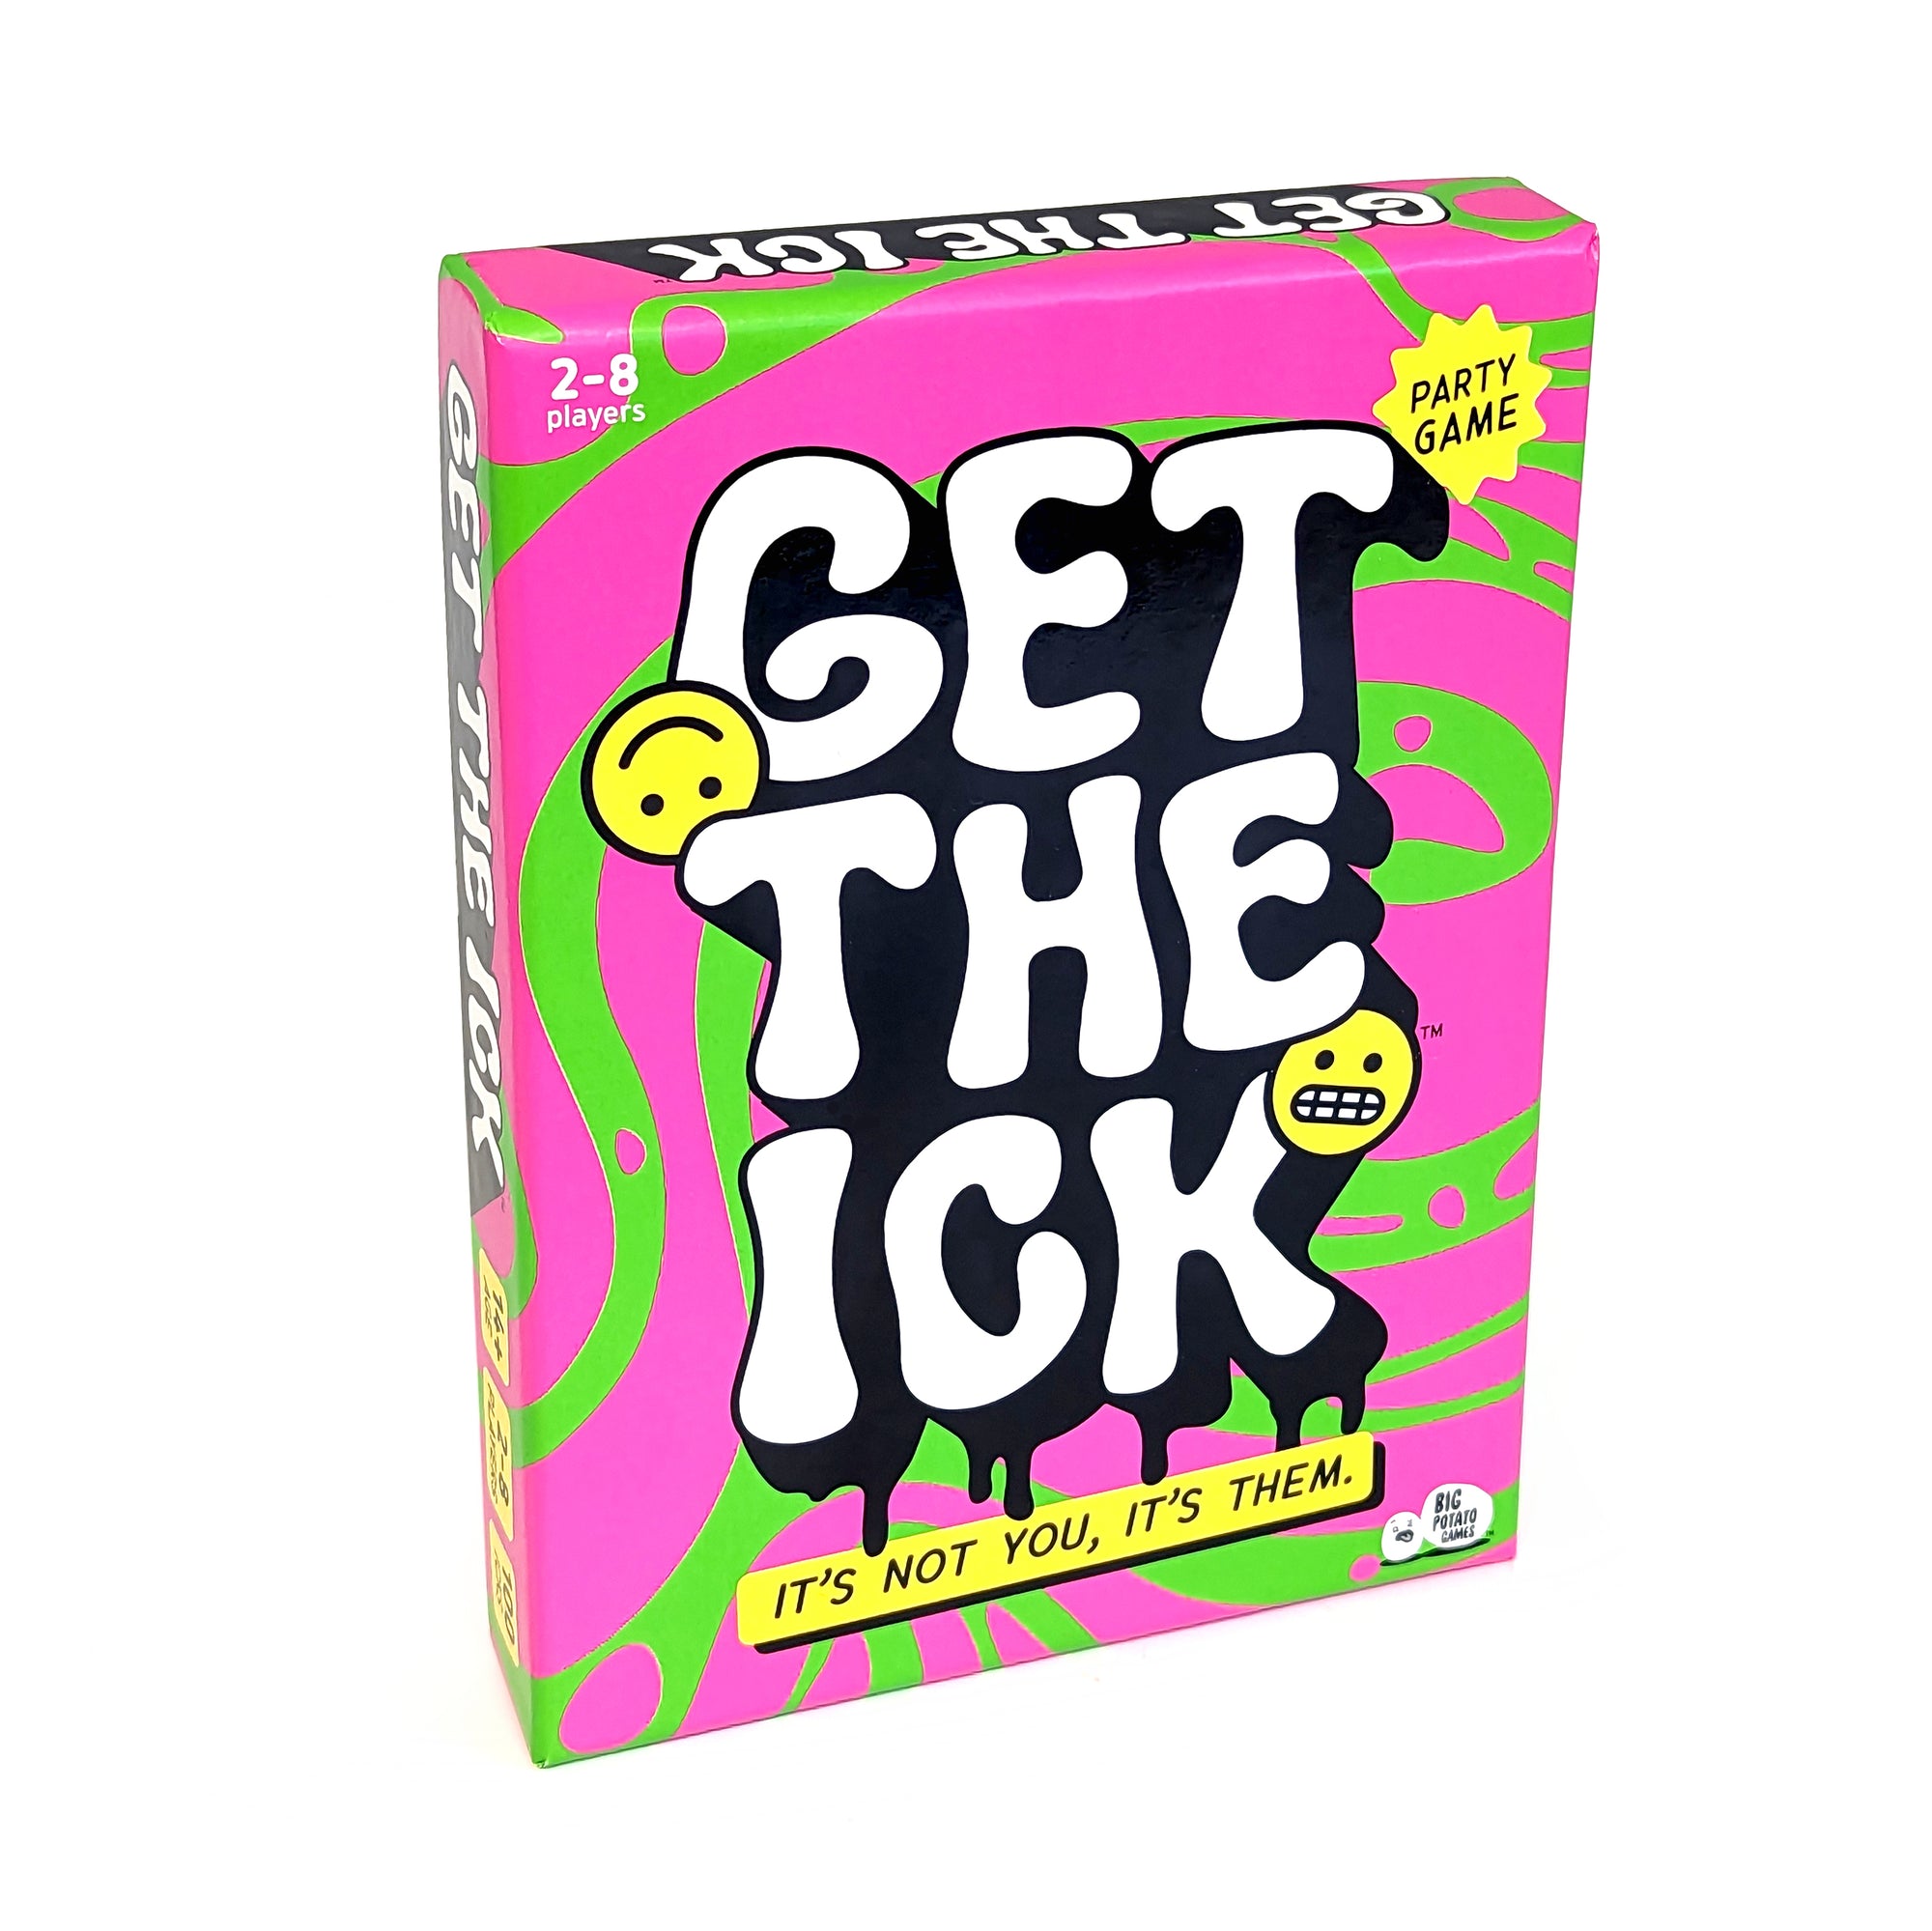 Get The Ick Party Game by Big potato Games at Penny Black